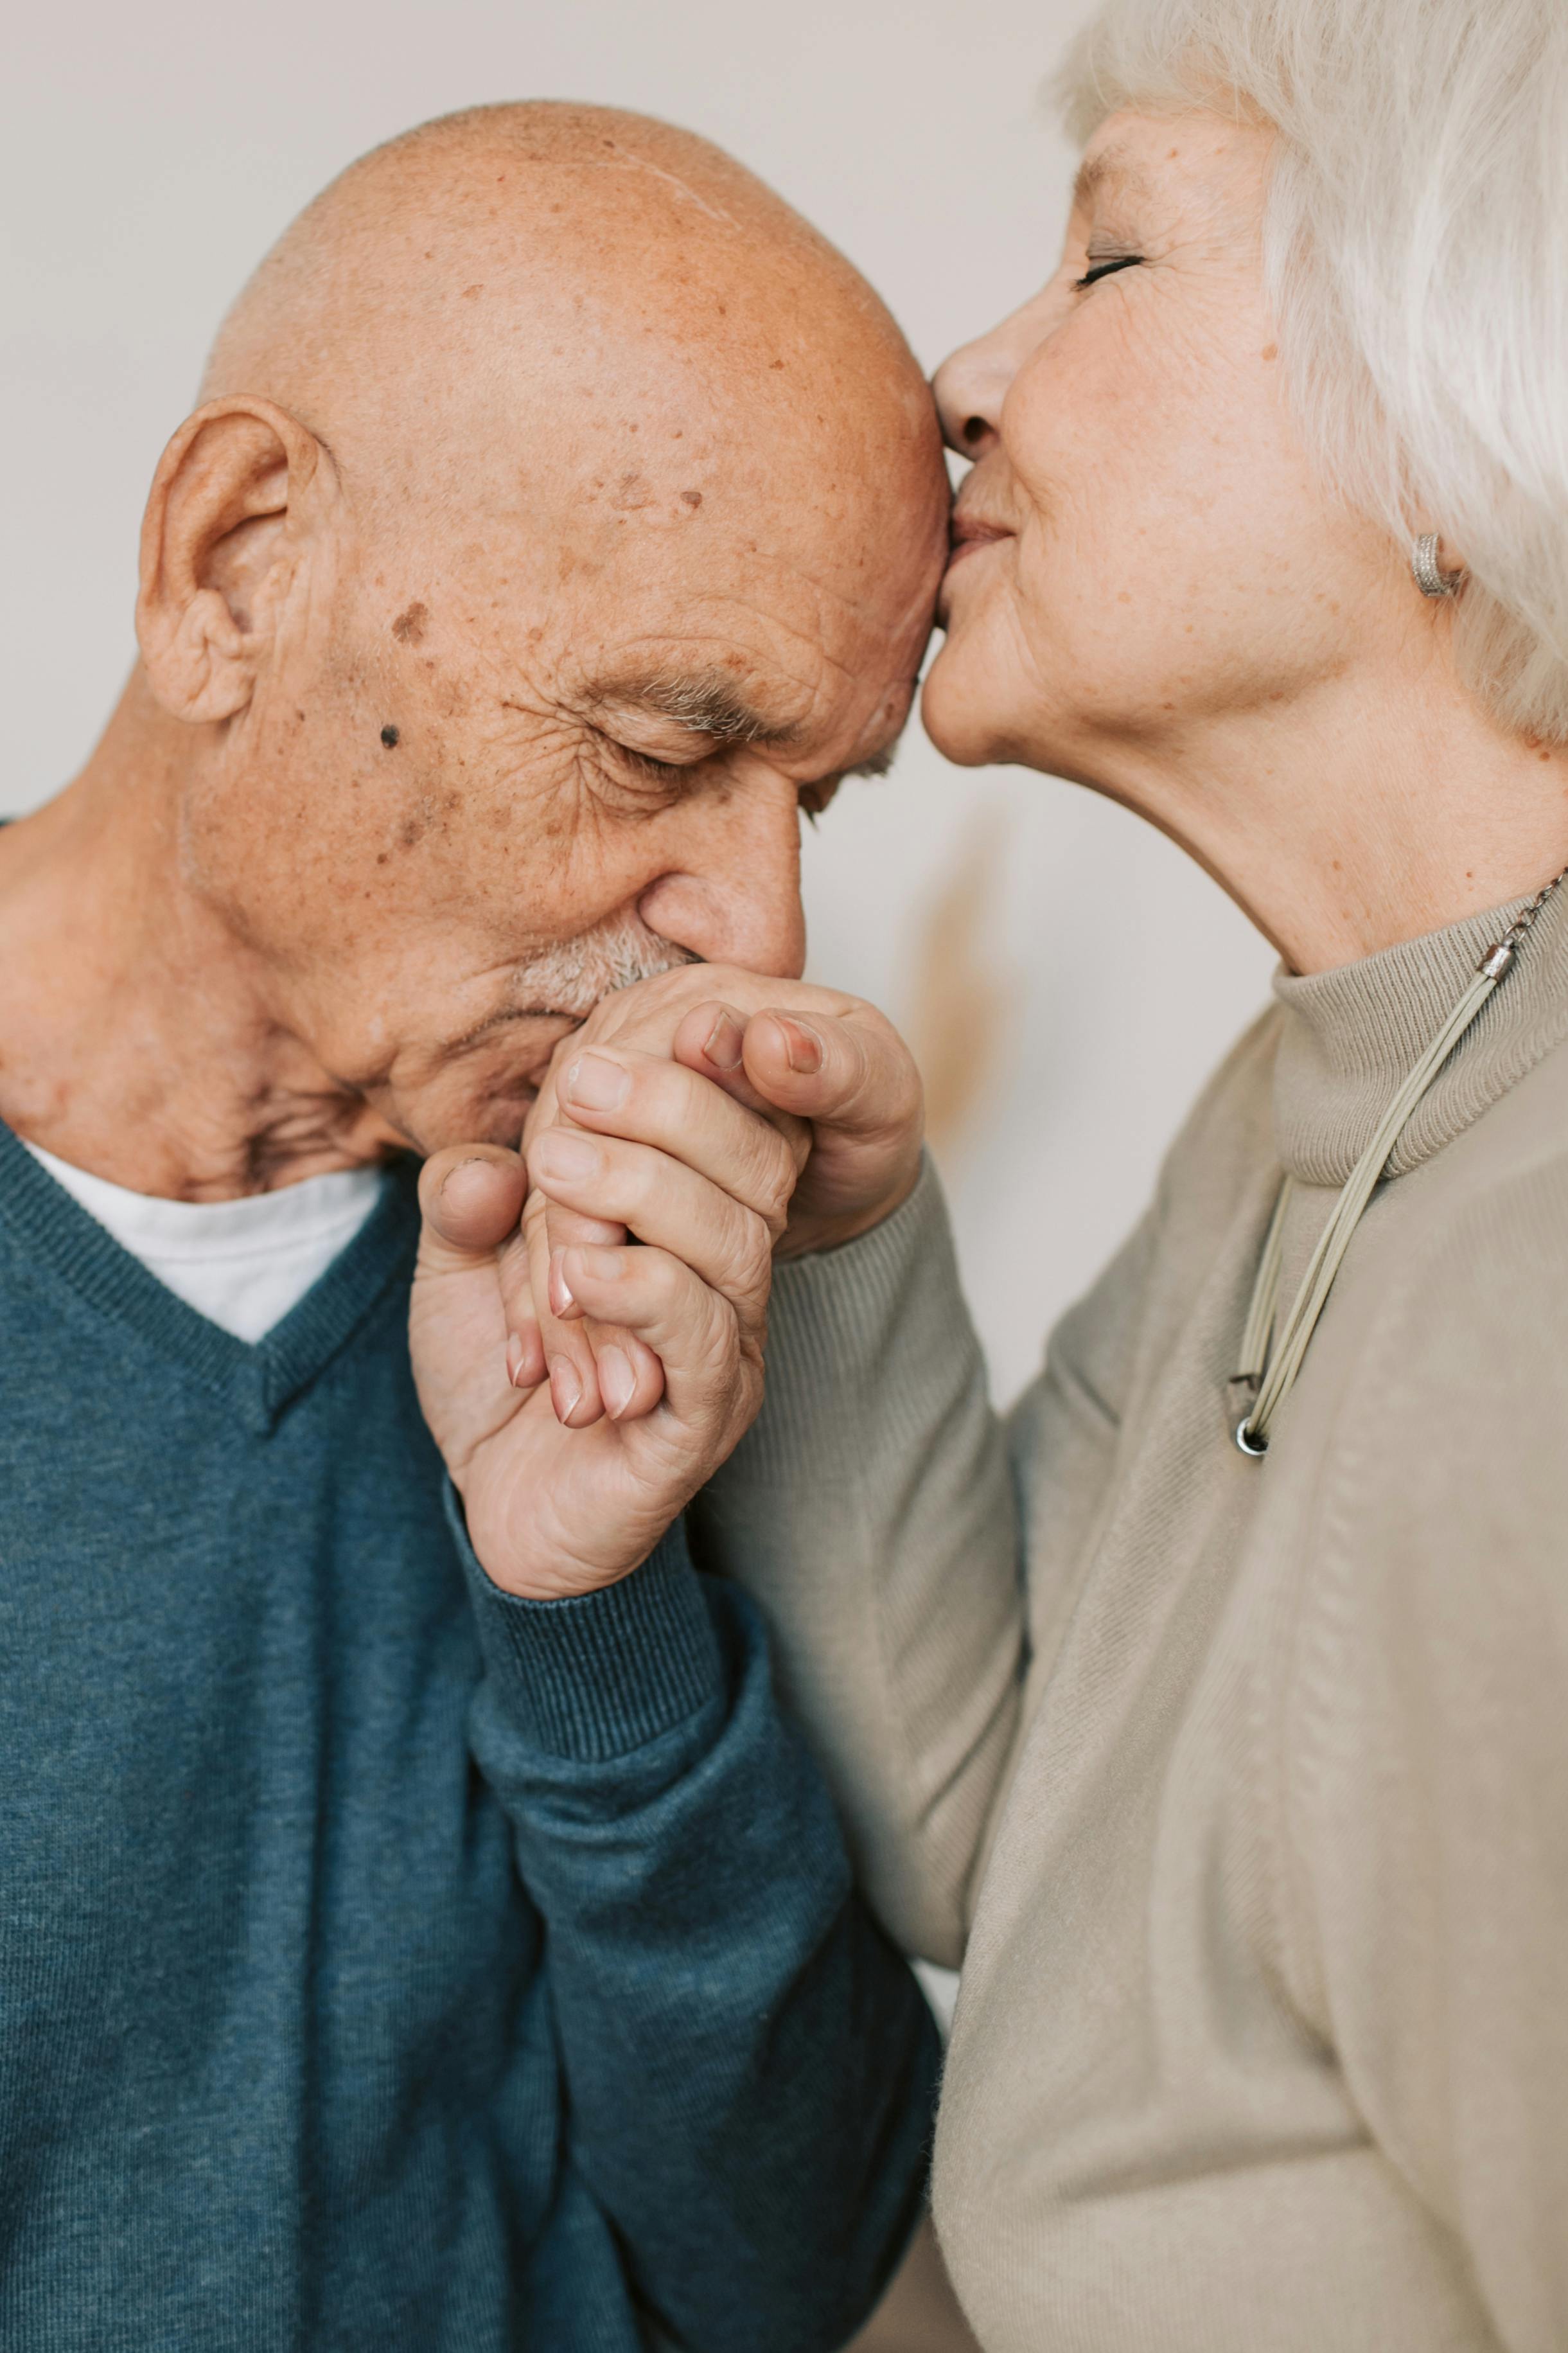 A couple being romantic | Source: Pexels